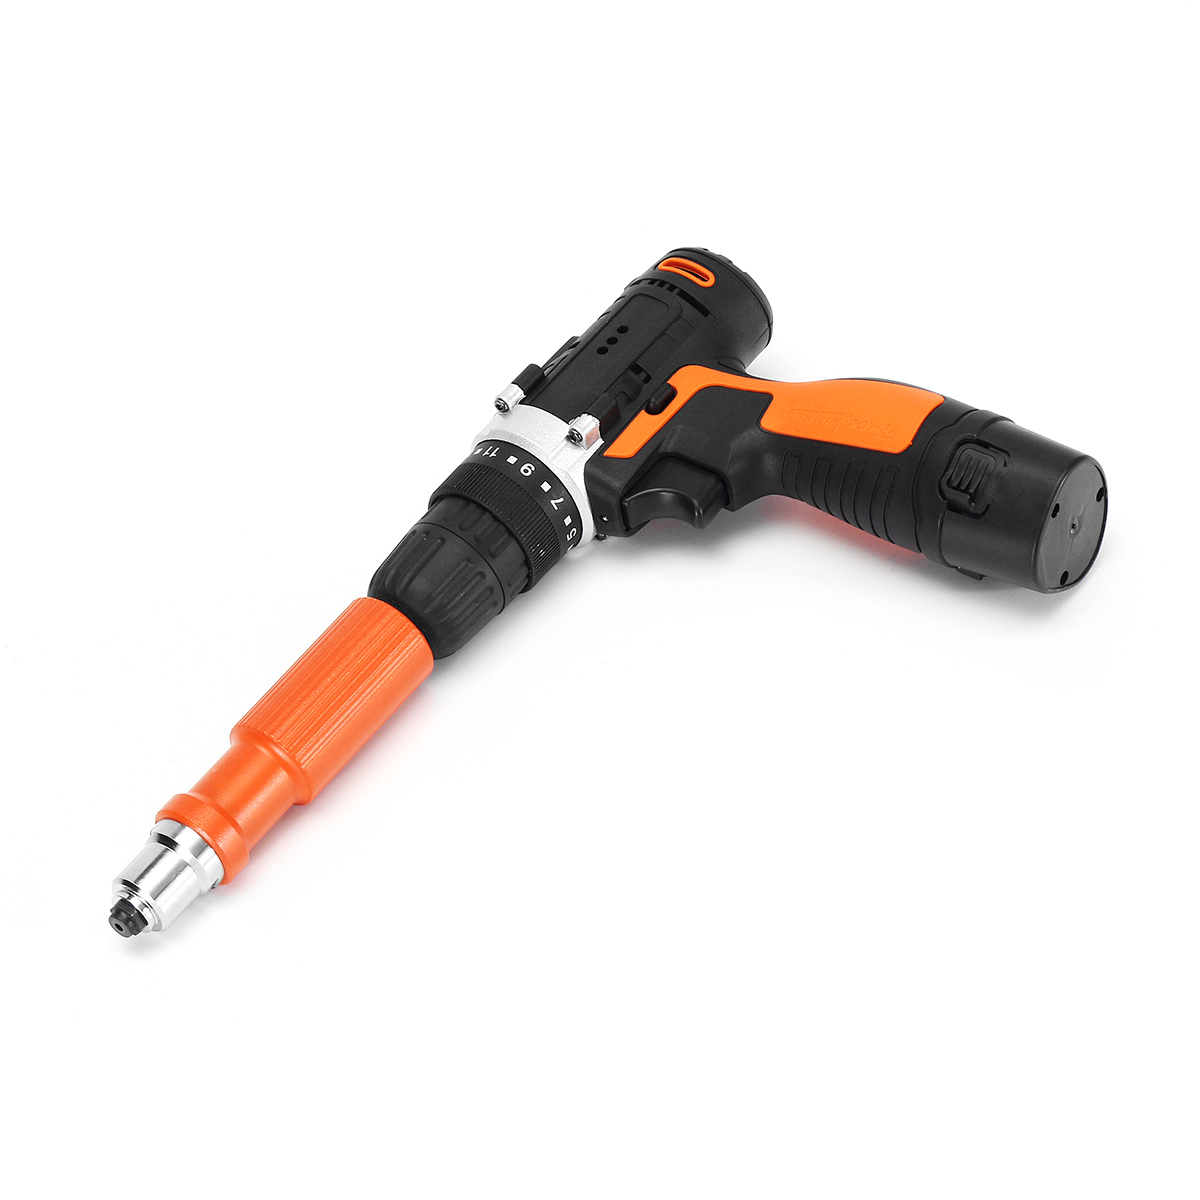 Drillpro-Upgraded-Electric-Rivet-Nut-Attachment-Cordless-Riveting-Tool-Drill-Adapter-for-Electric-Dr-1285523-4